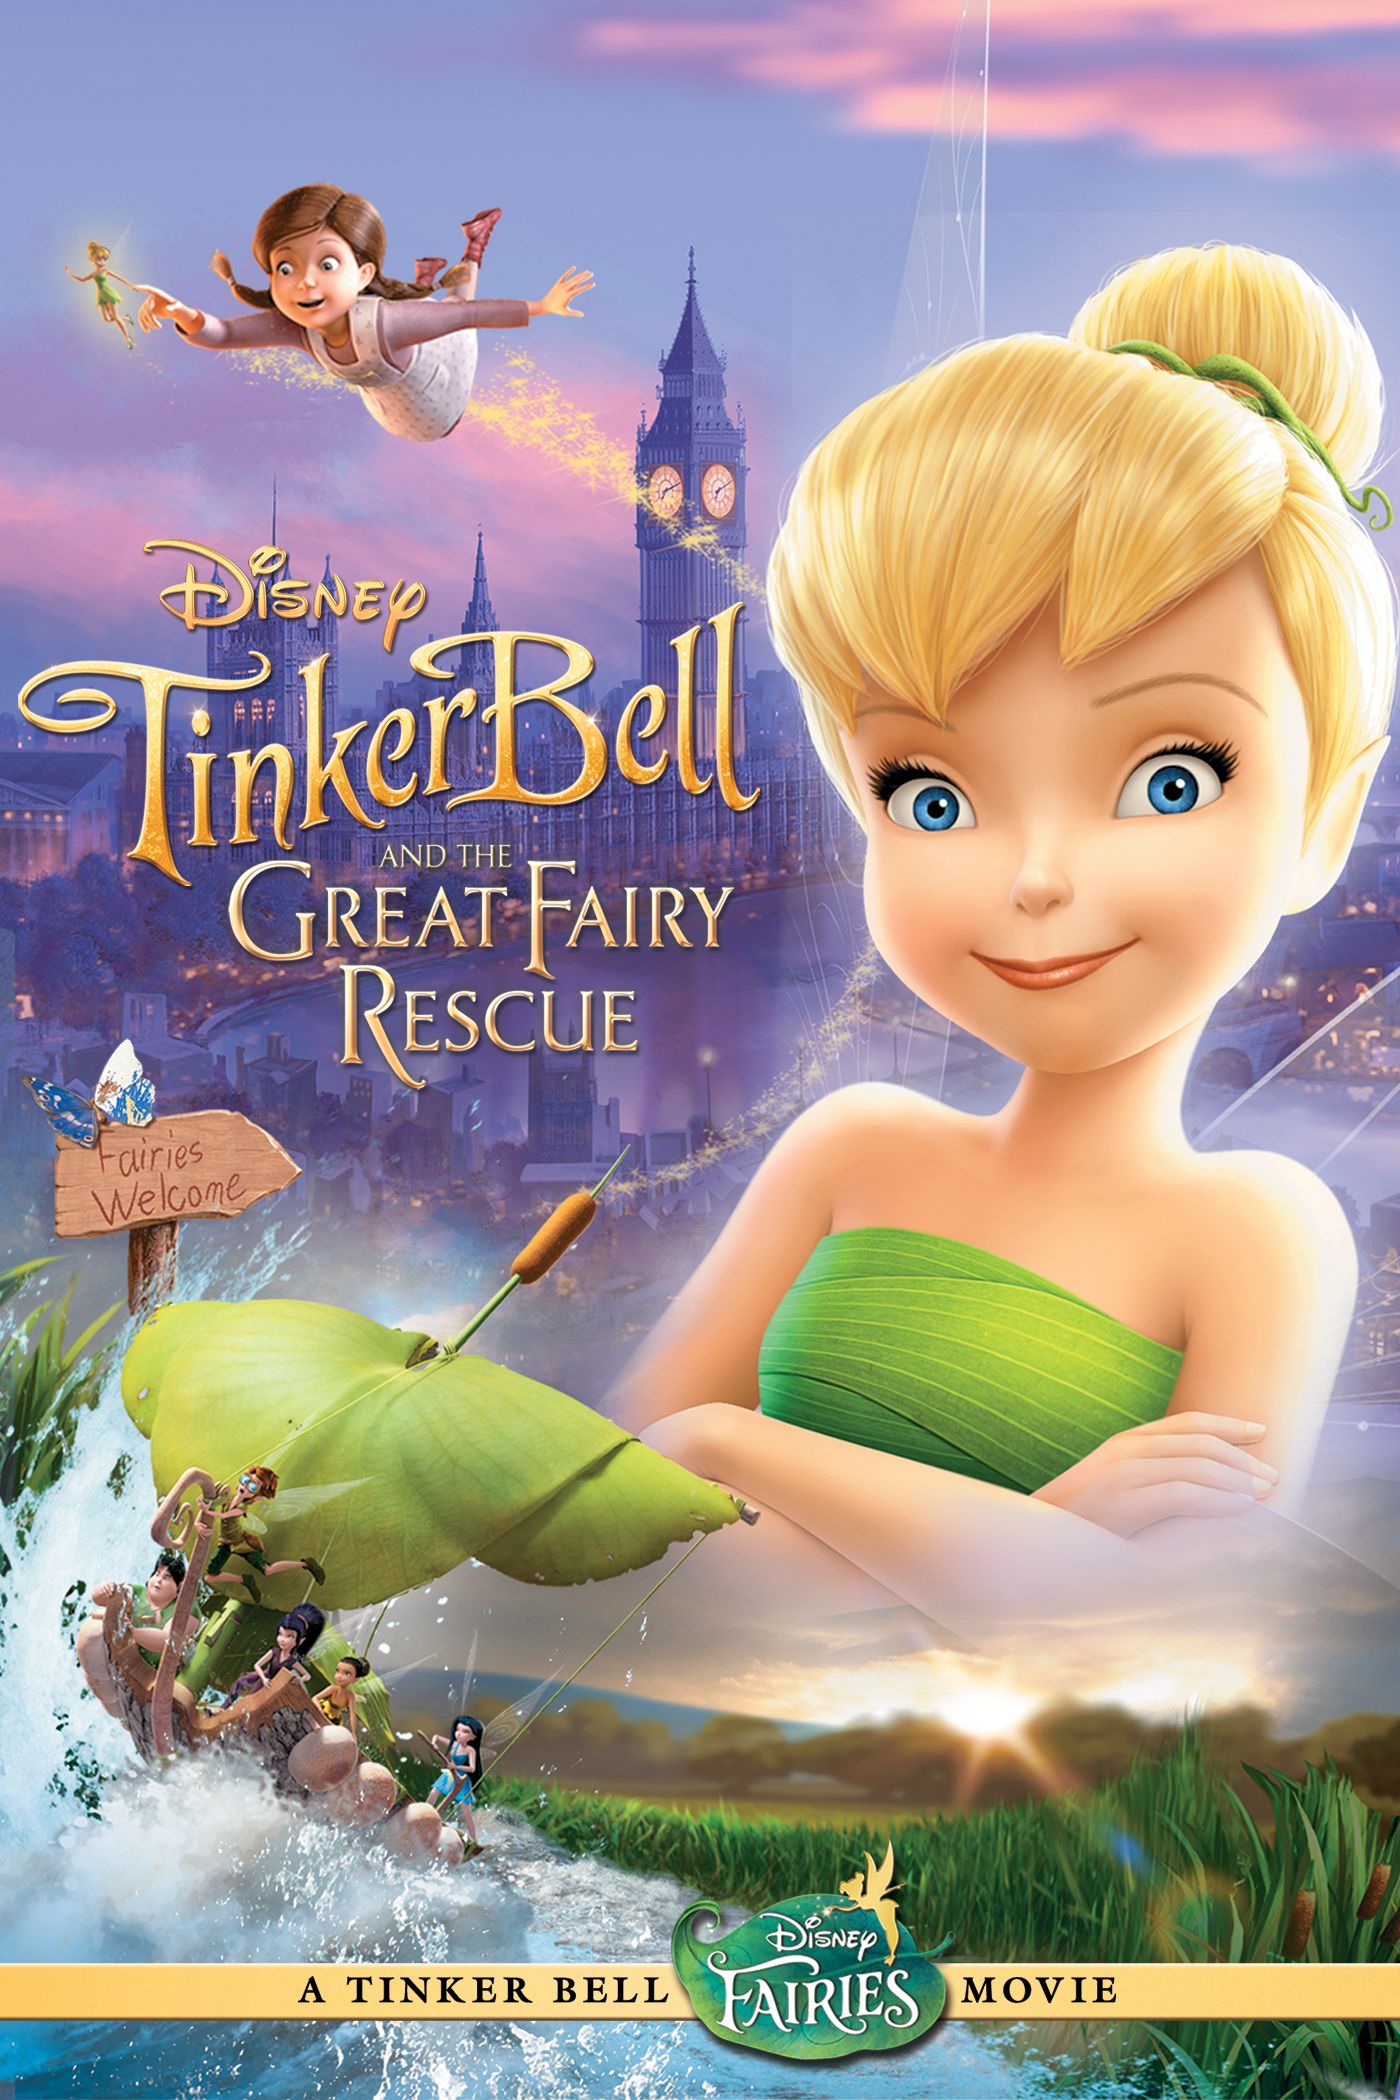 corey nordin recommends tinkerbell 1 full movie pic